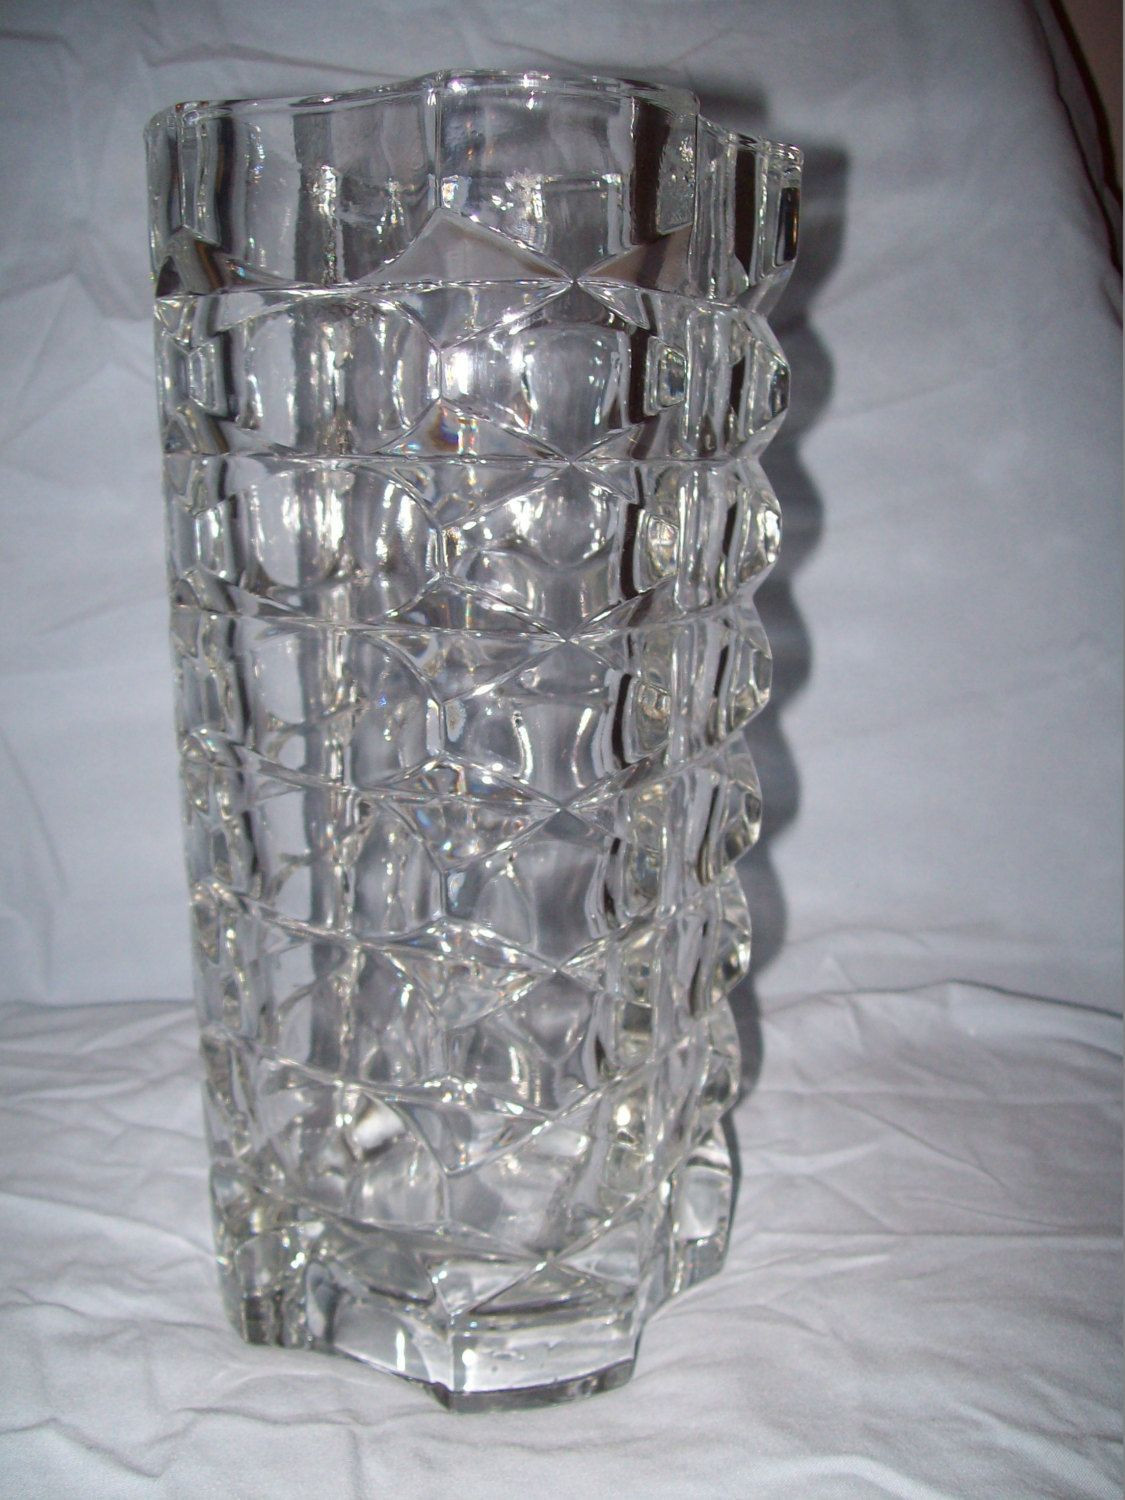 18 Wonderful Czech Crystal Vase 2024 free download czech crystal vase of lead crystal vases pics clear glass very old large vase leaded glass in lead crystal vases pics clear glass very old large vase leaded glass very heavy 66 00